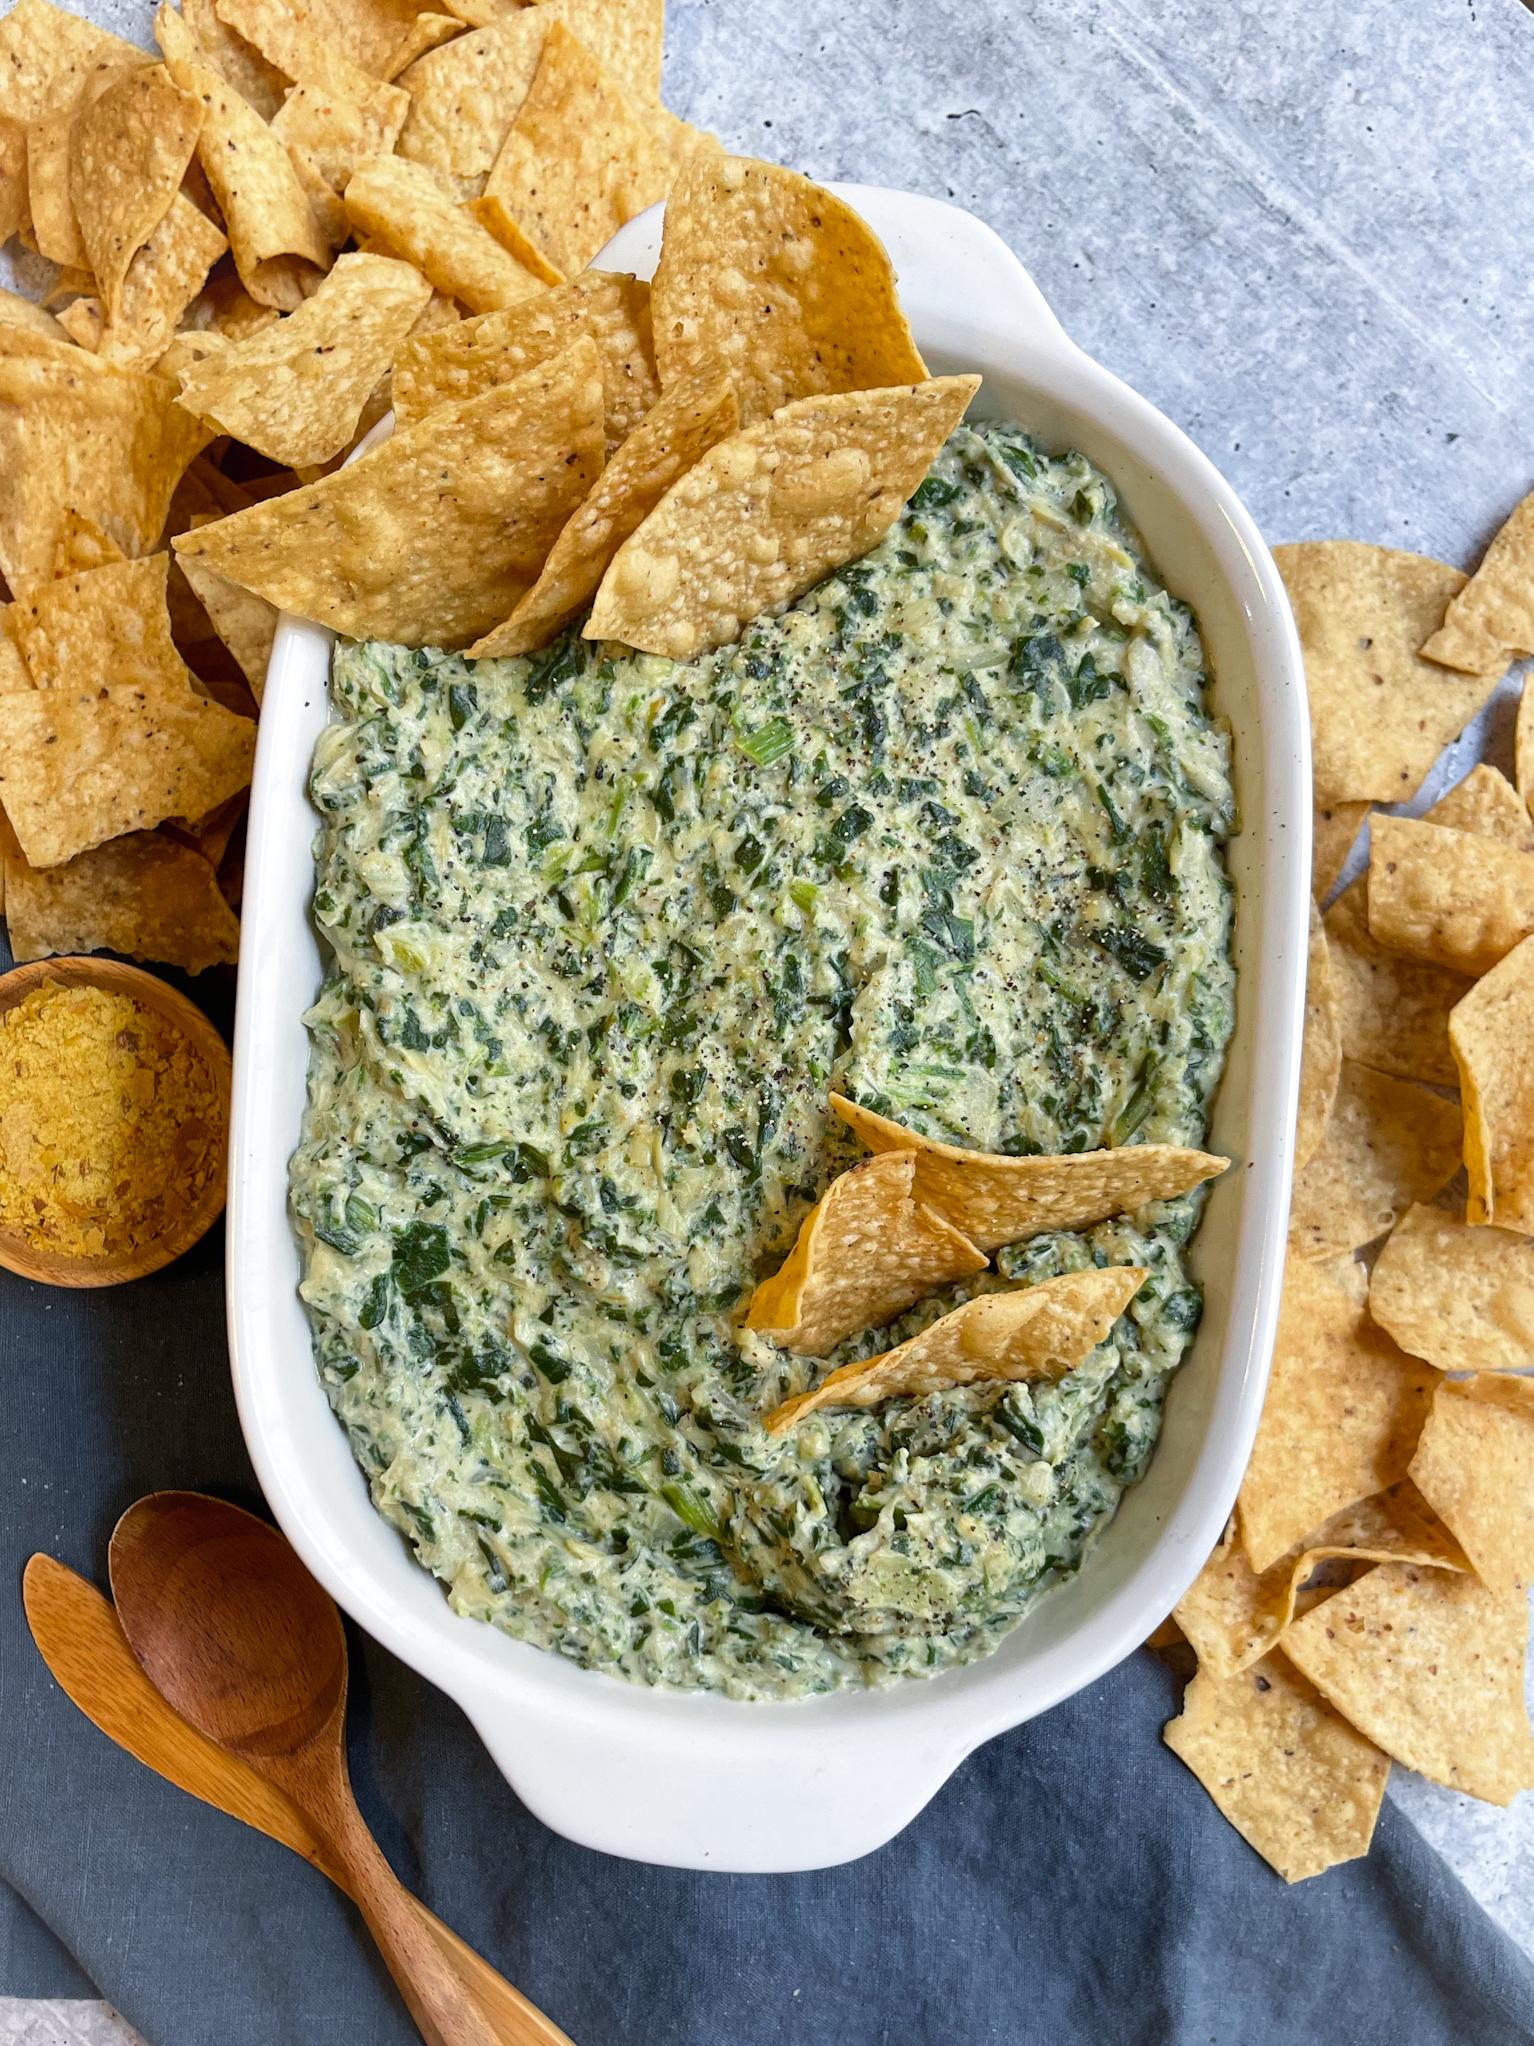  This Artichoke Dip is the ultimate crowd-pleaser for any party or gathering.